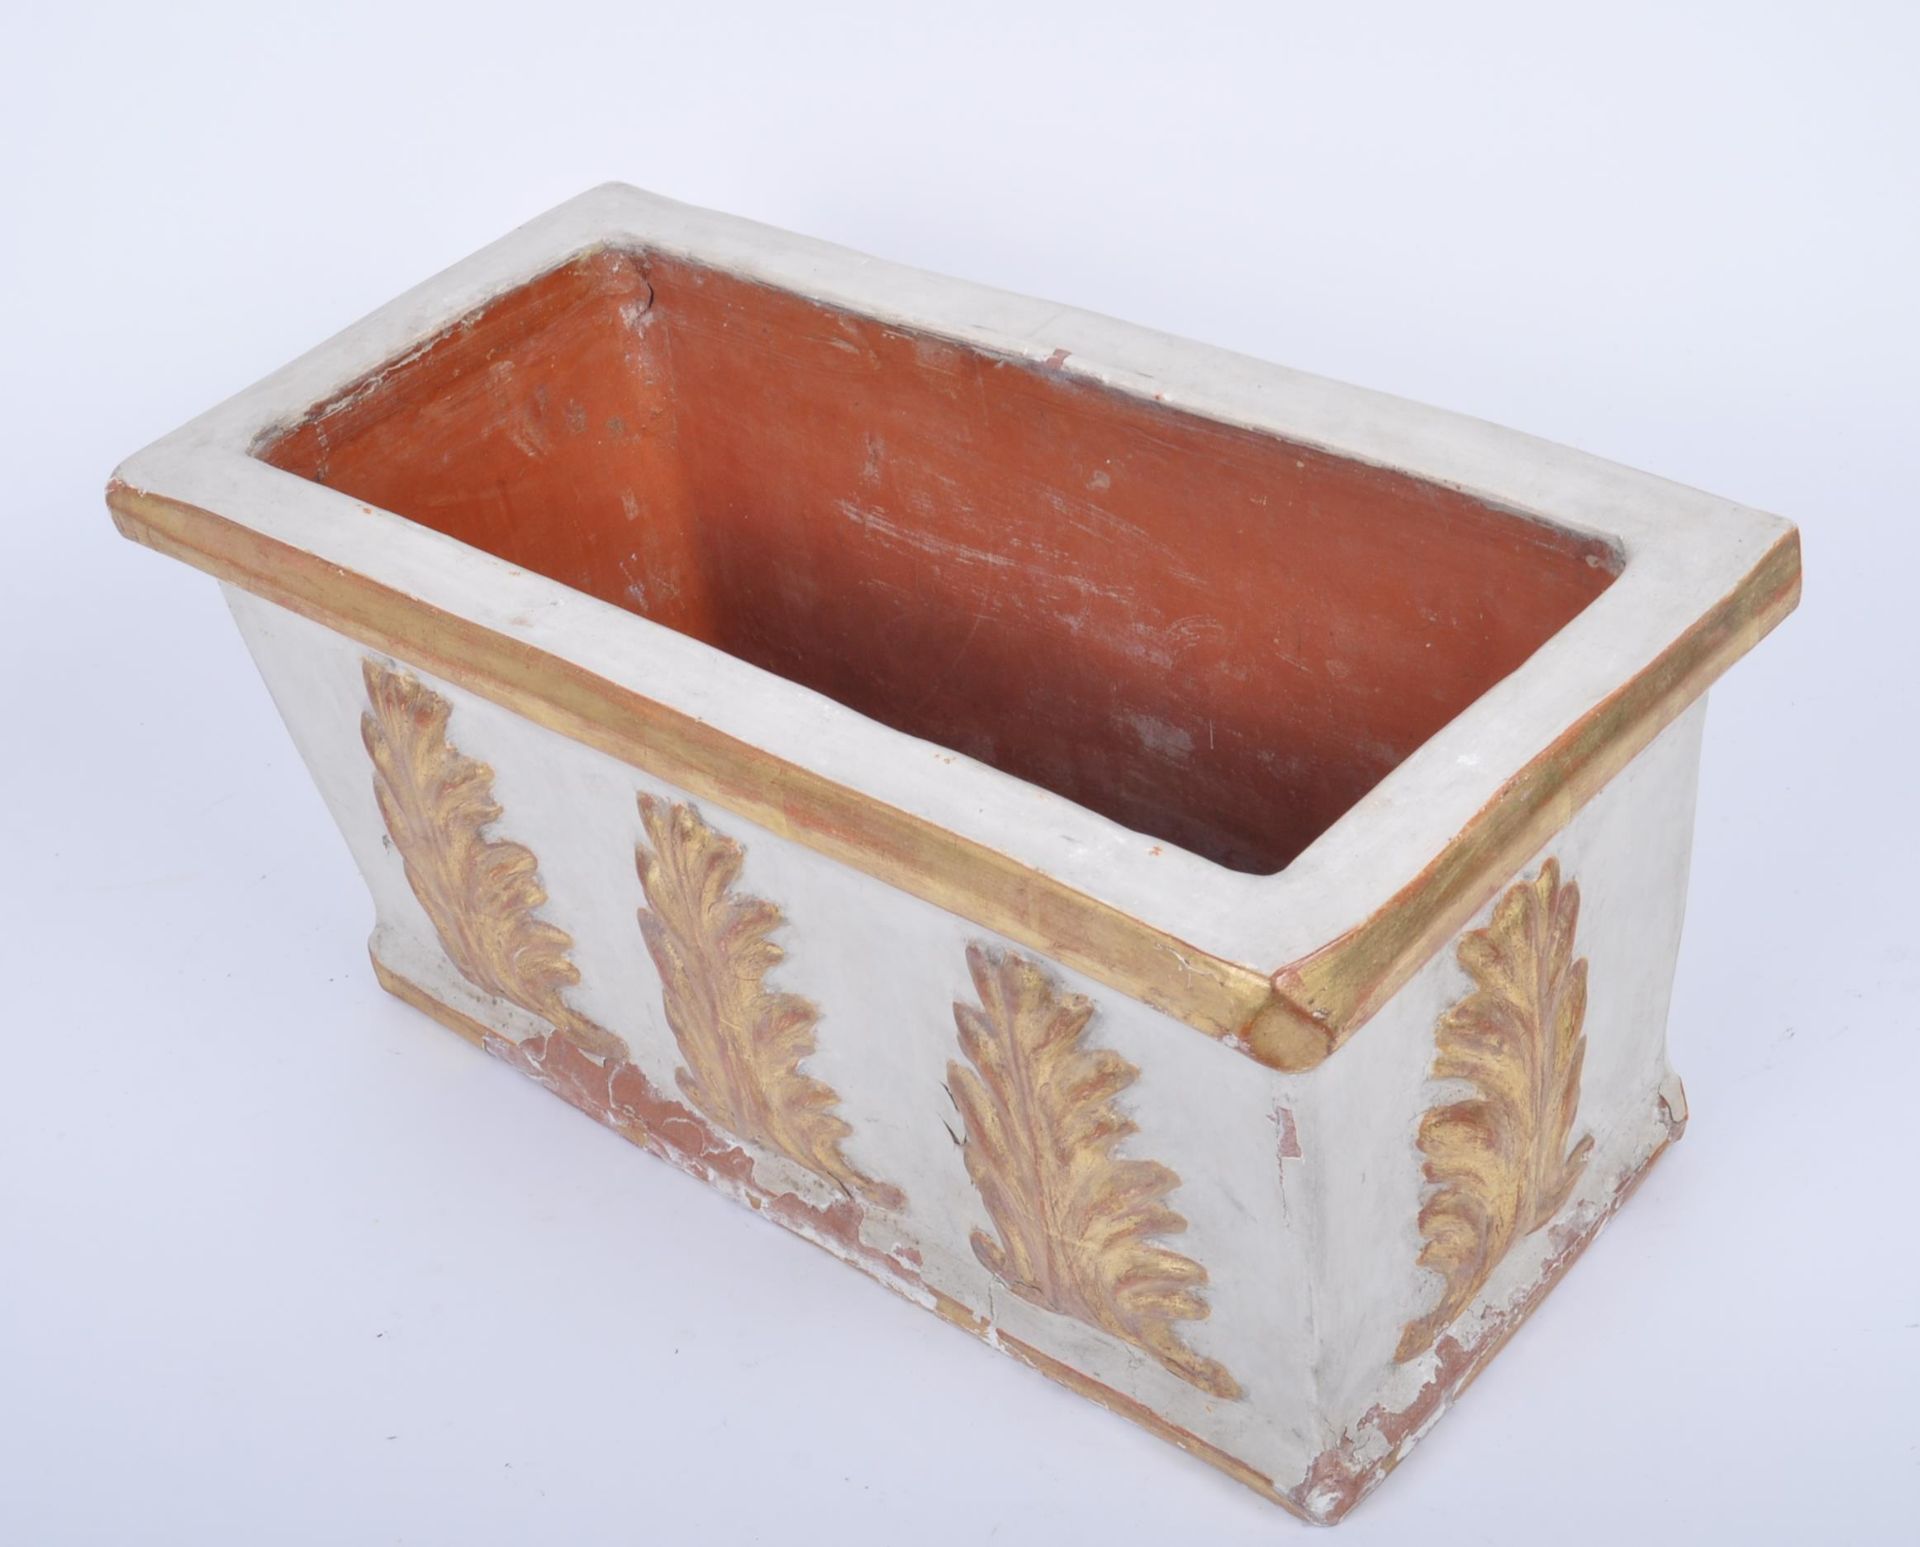 MIDCENTURY NEOCLASSICAL GILDED TERRACOTTA PLANTER - Image 4 of 6